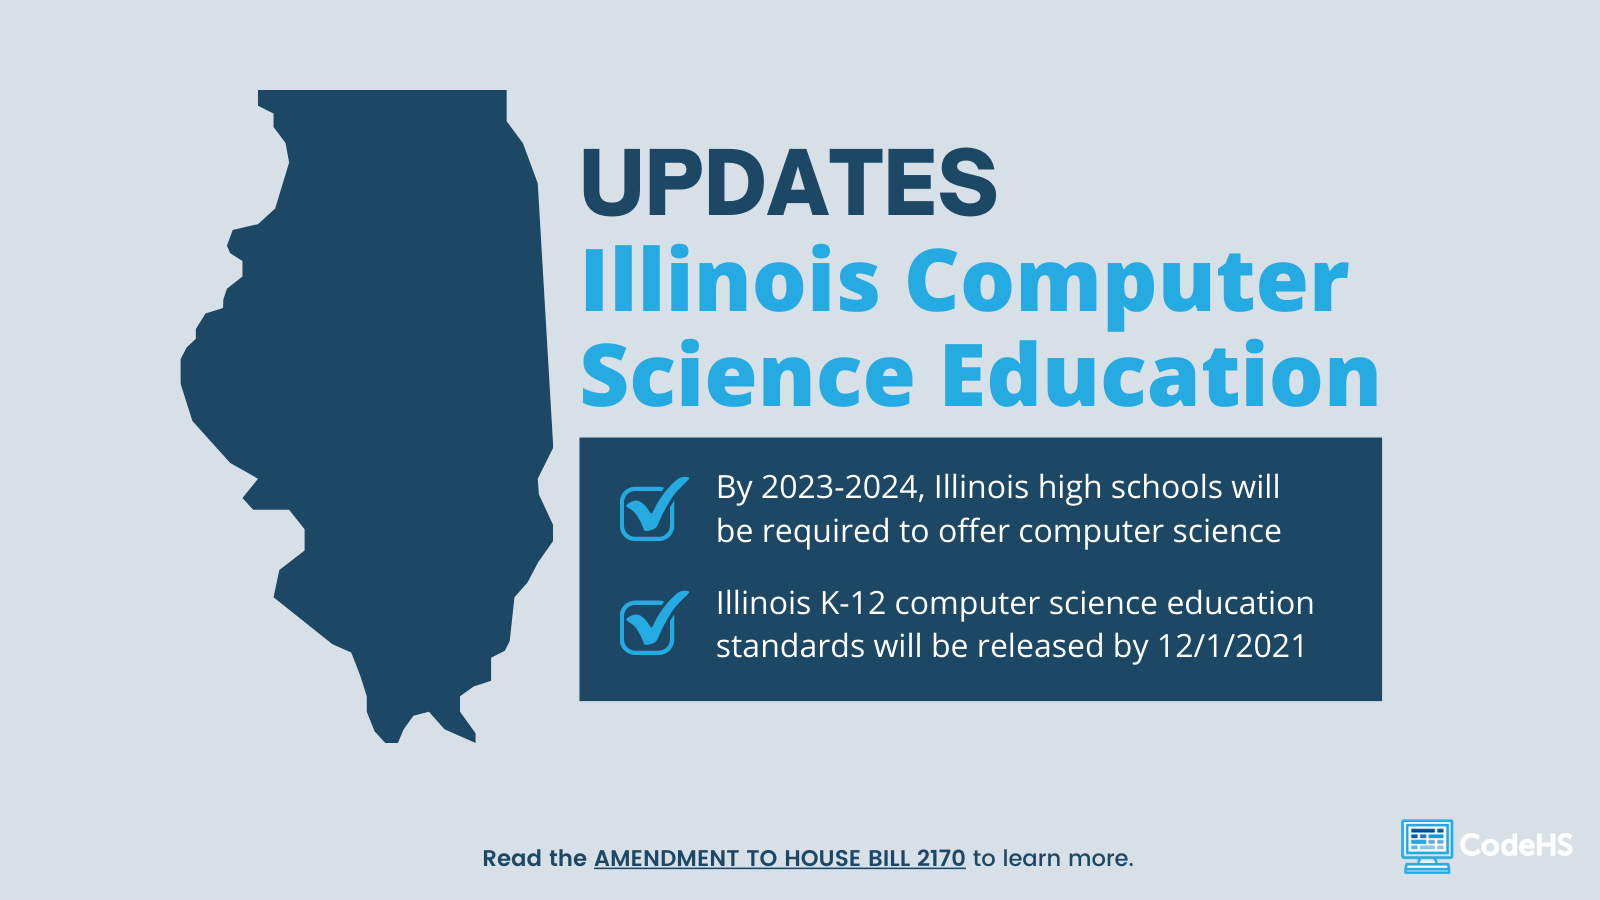 Illinois to Adopt CS Standards and Require Computer Science for